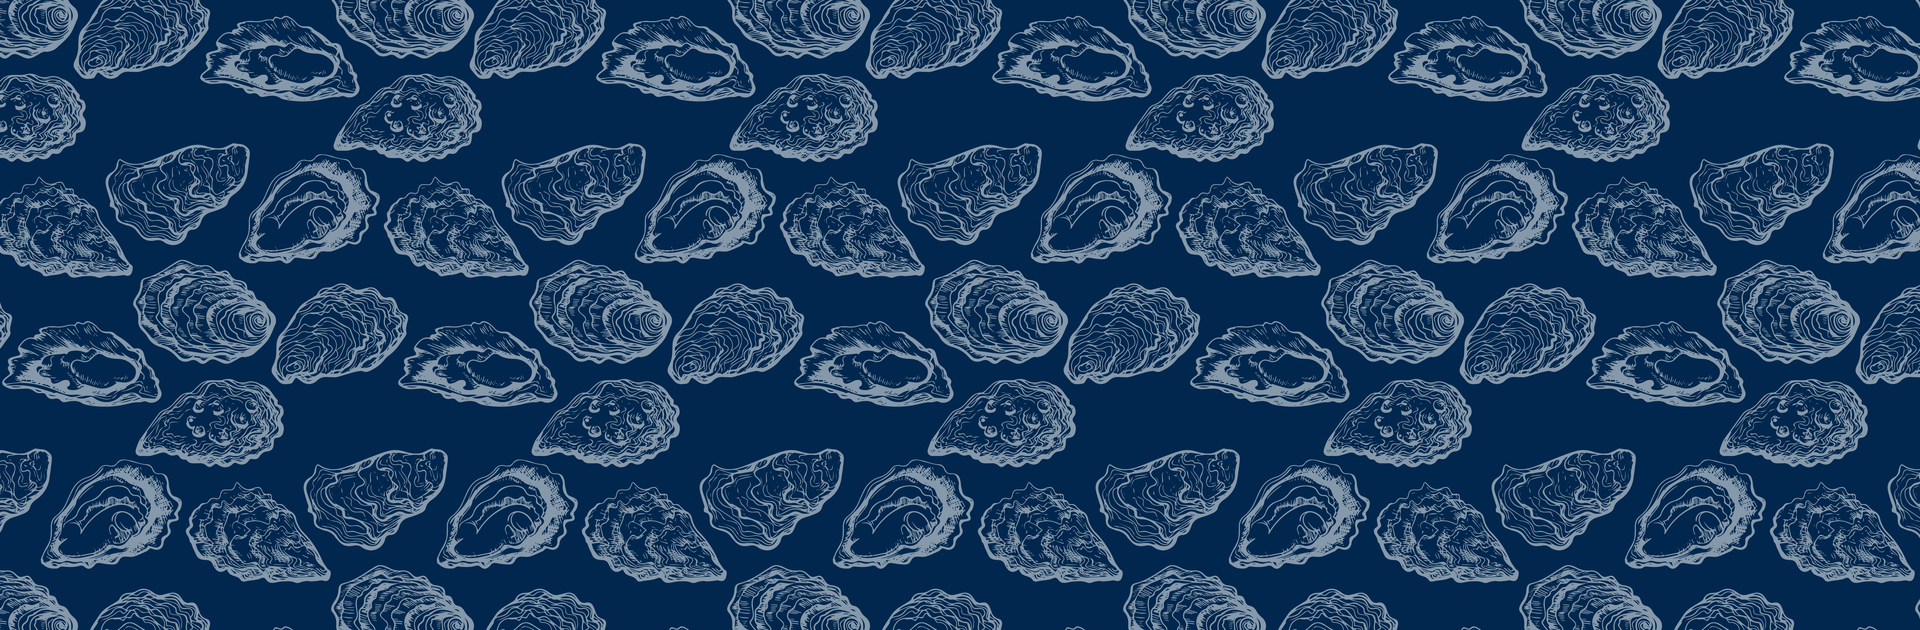 Oyster banner